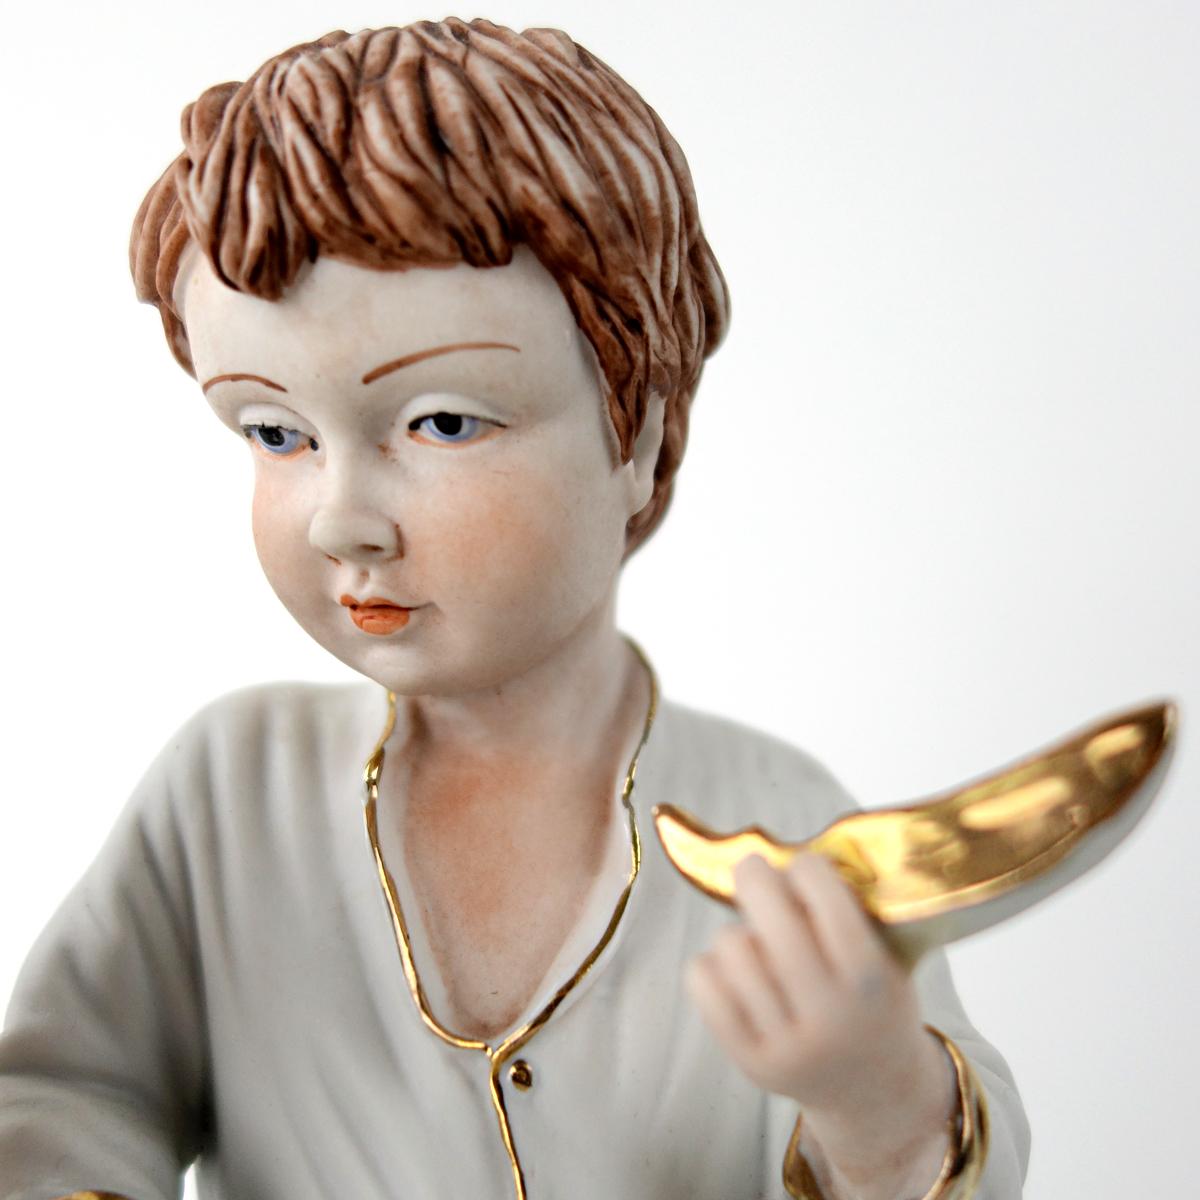 Dutch Biscuit Porcelain Statuette of Two Boys Eating a Melon with Gold-Colored Details For Sale